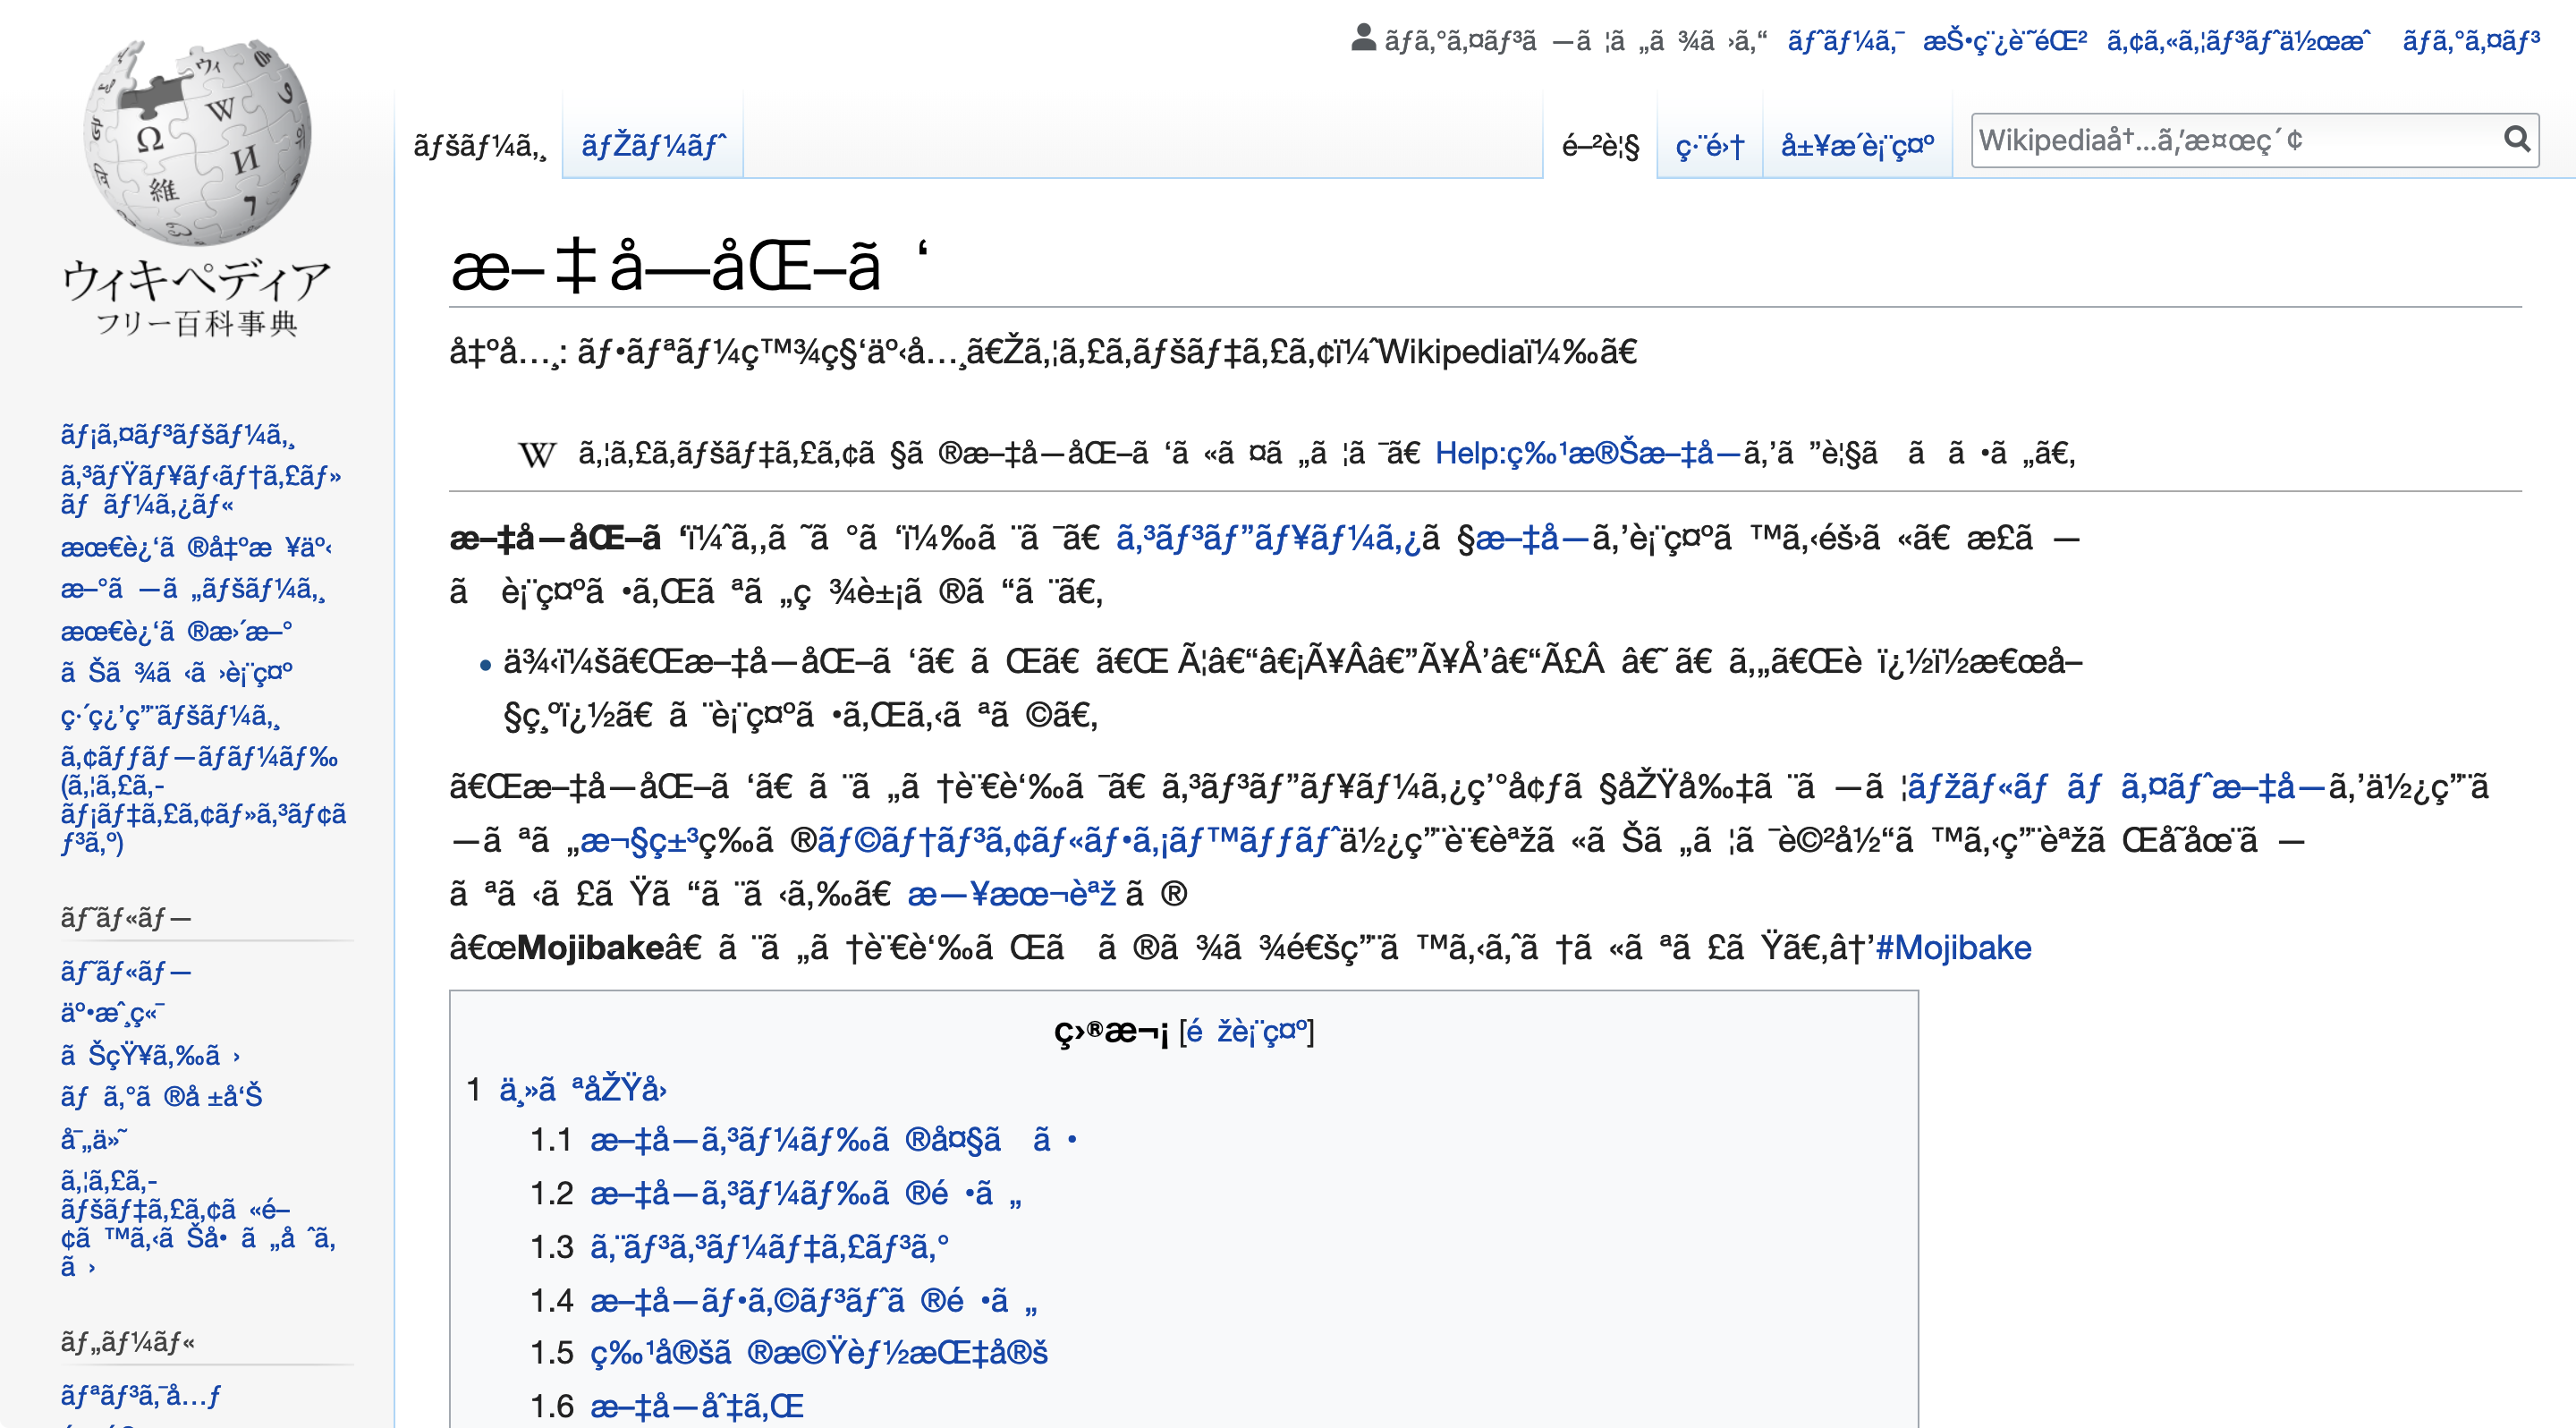 A picture of wikipedia with garbled text